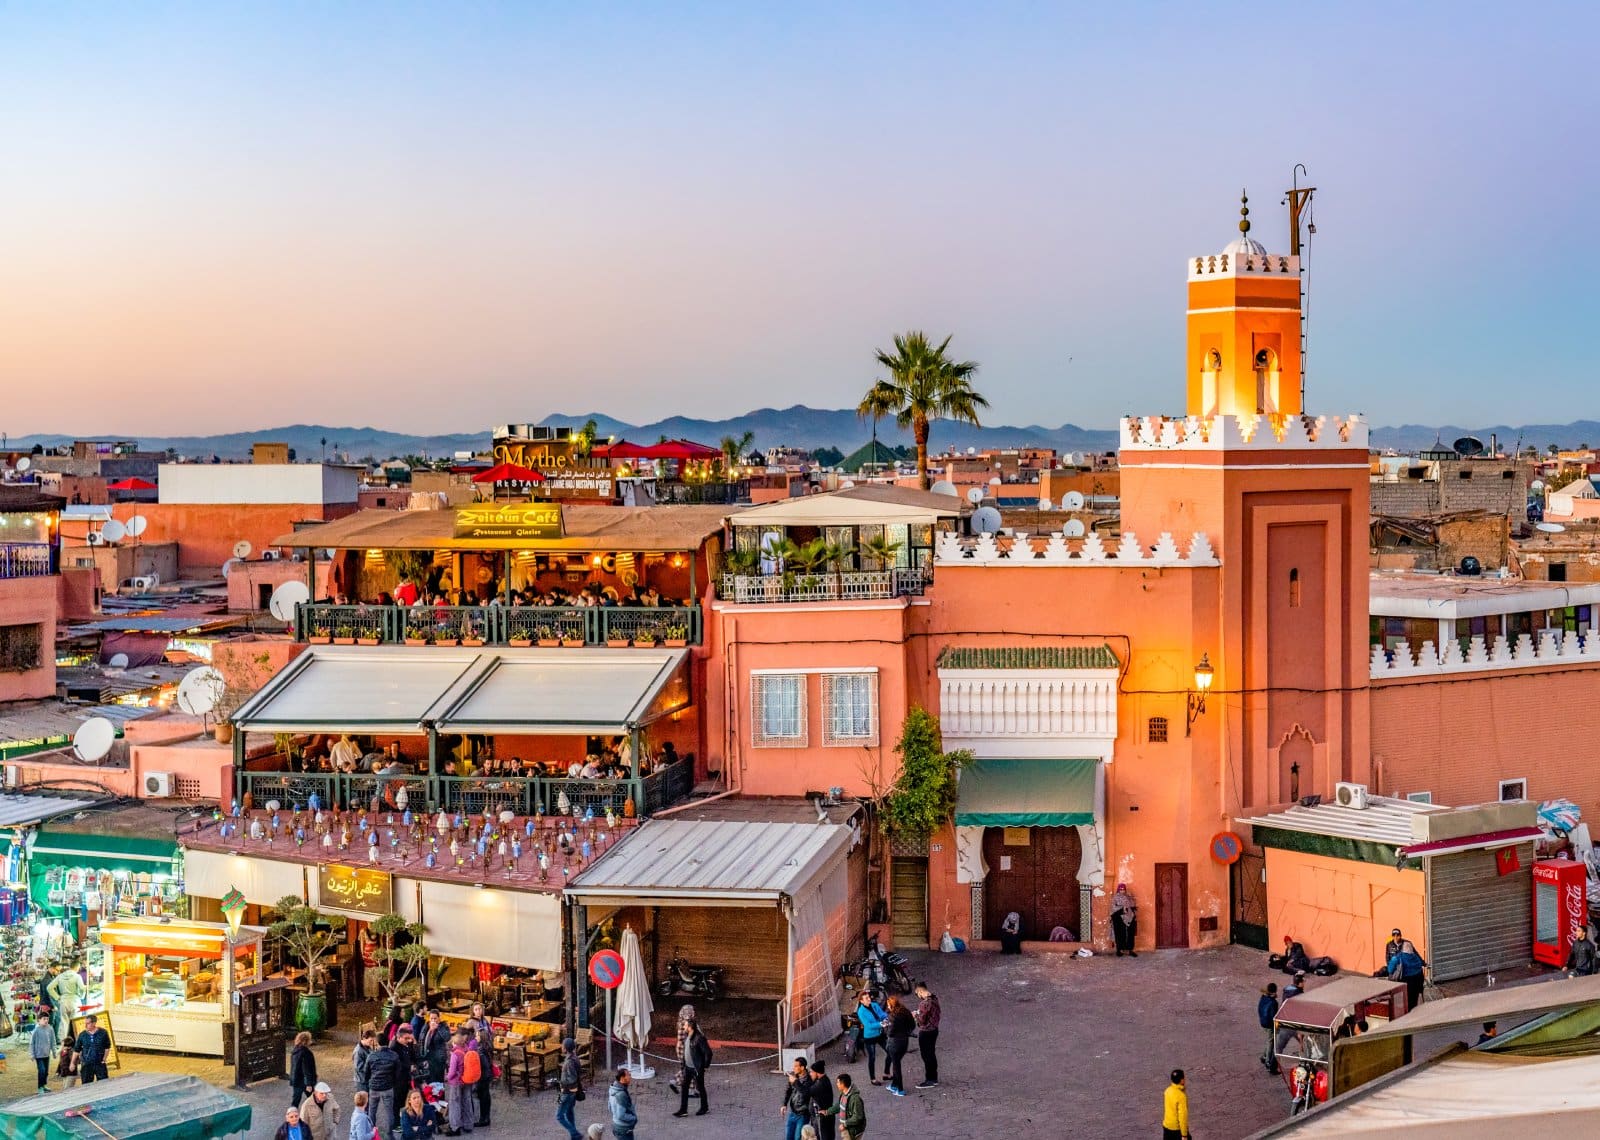 <p class="wp-caption-text">Image Credit: Shutterstock / posztos</p>  <p>In Moroccan markets, there’s a particular frustration with American bargaining practices, which come off as disrespectful and ignorant of local trading customs.</p>